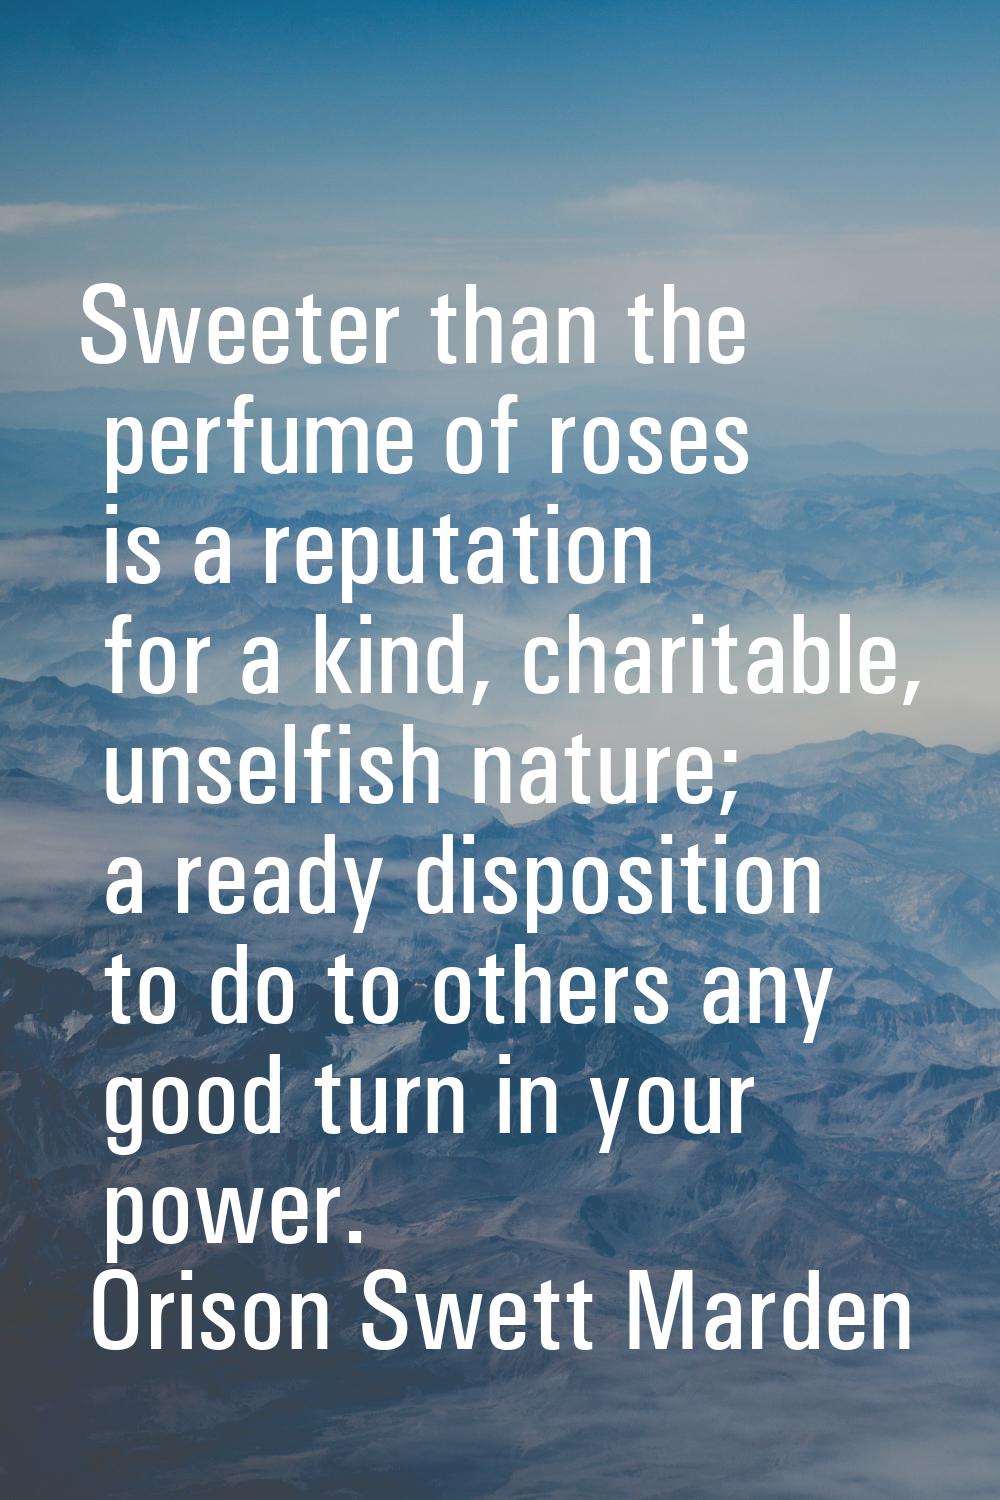 Sweeter than the perfume of roses is a reputation for a kind, charitable, unselfish nature; a ready